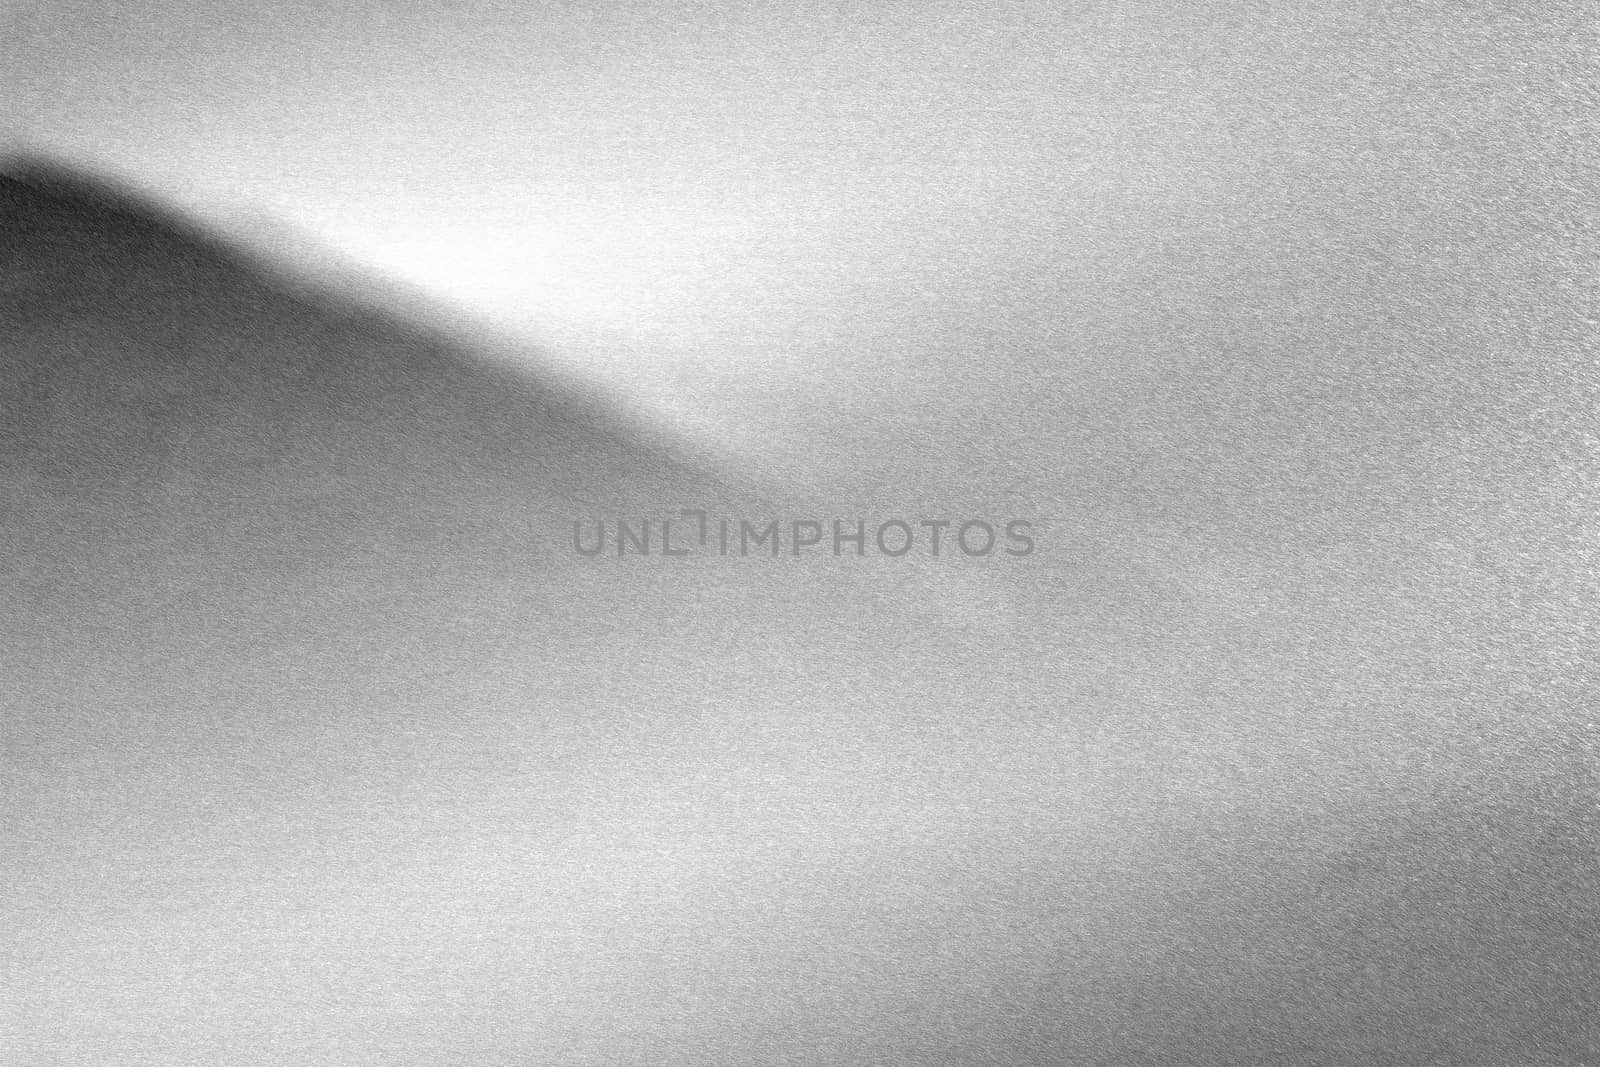 Light shining on rough silver metal wall, abstract texture background